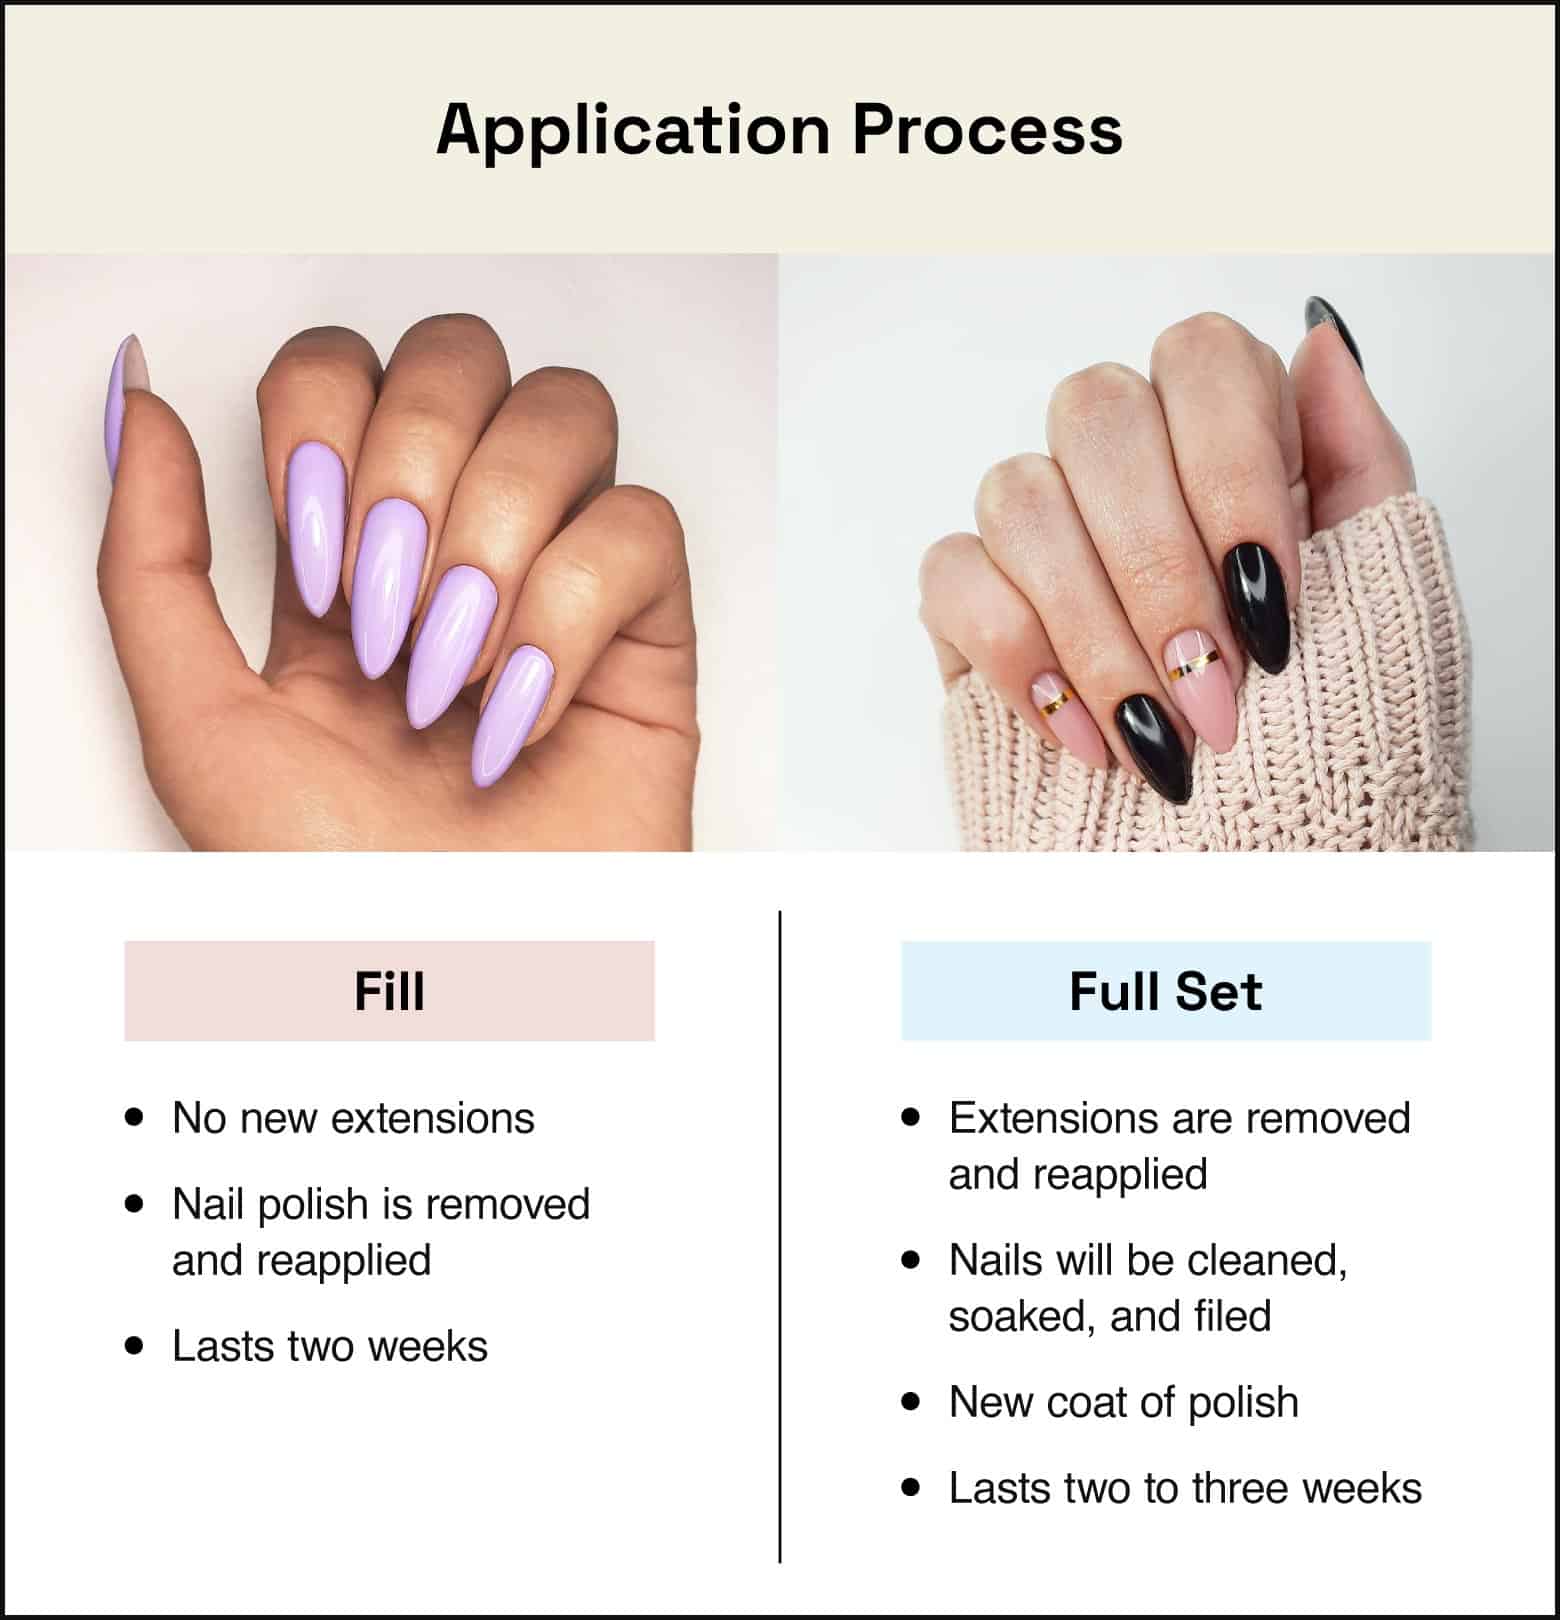 Gel Manicures: A Complete Guide to Gel Nails, Cost, and Care